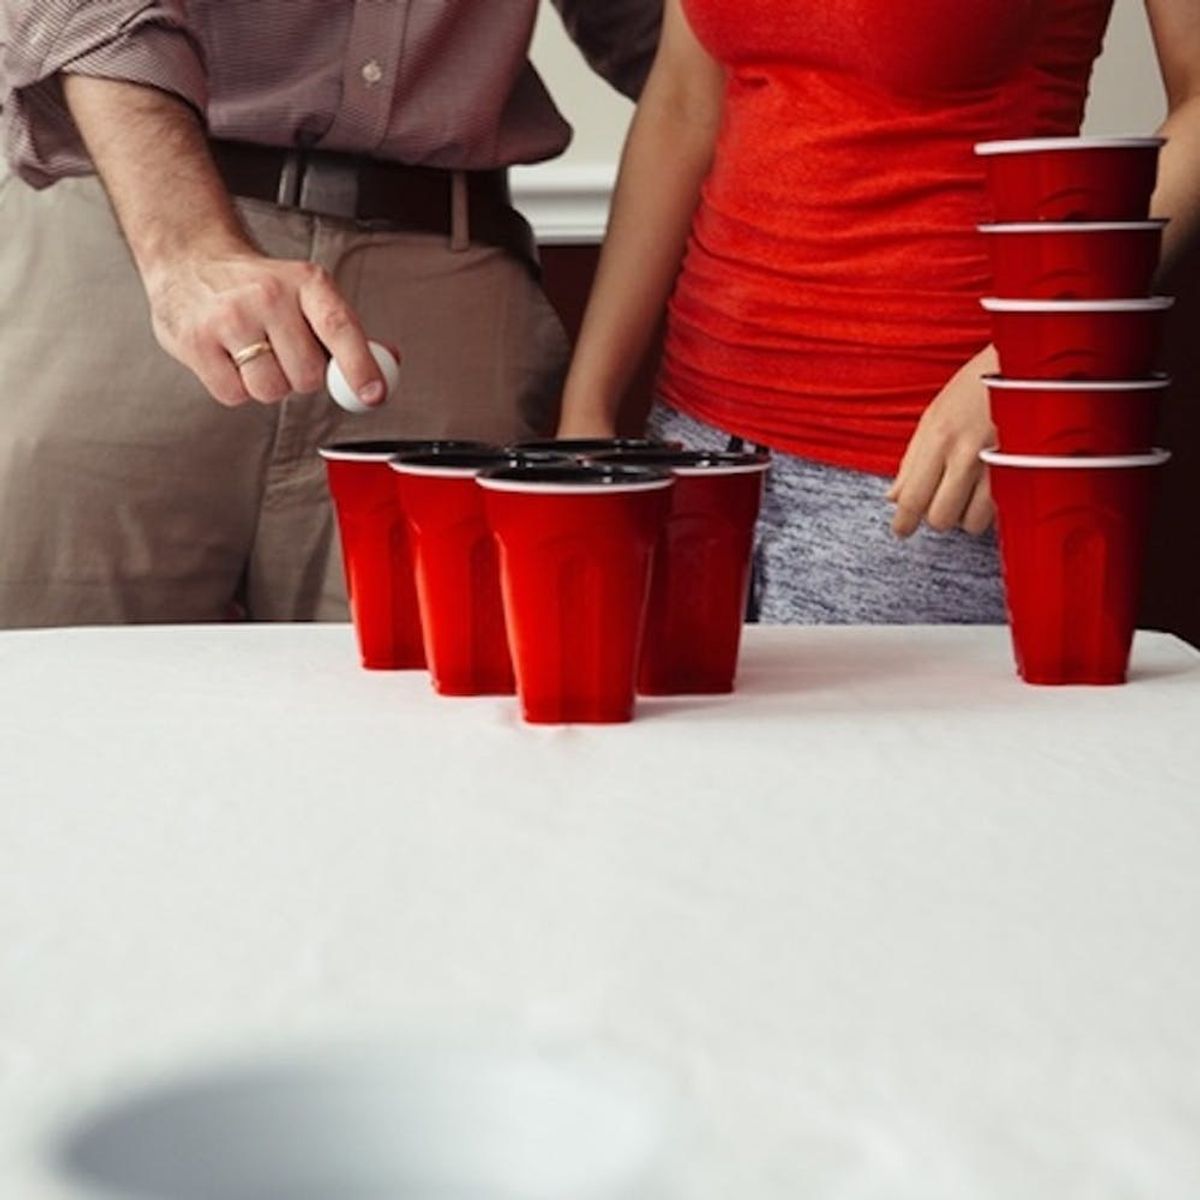 Why Beer Pong Is About to Get Way Less Gross - Brit + Co